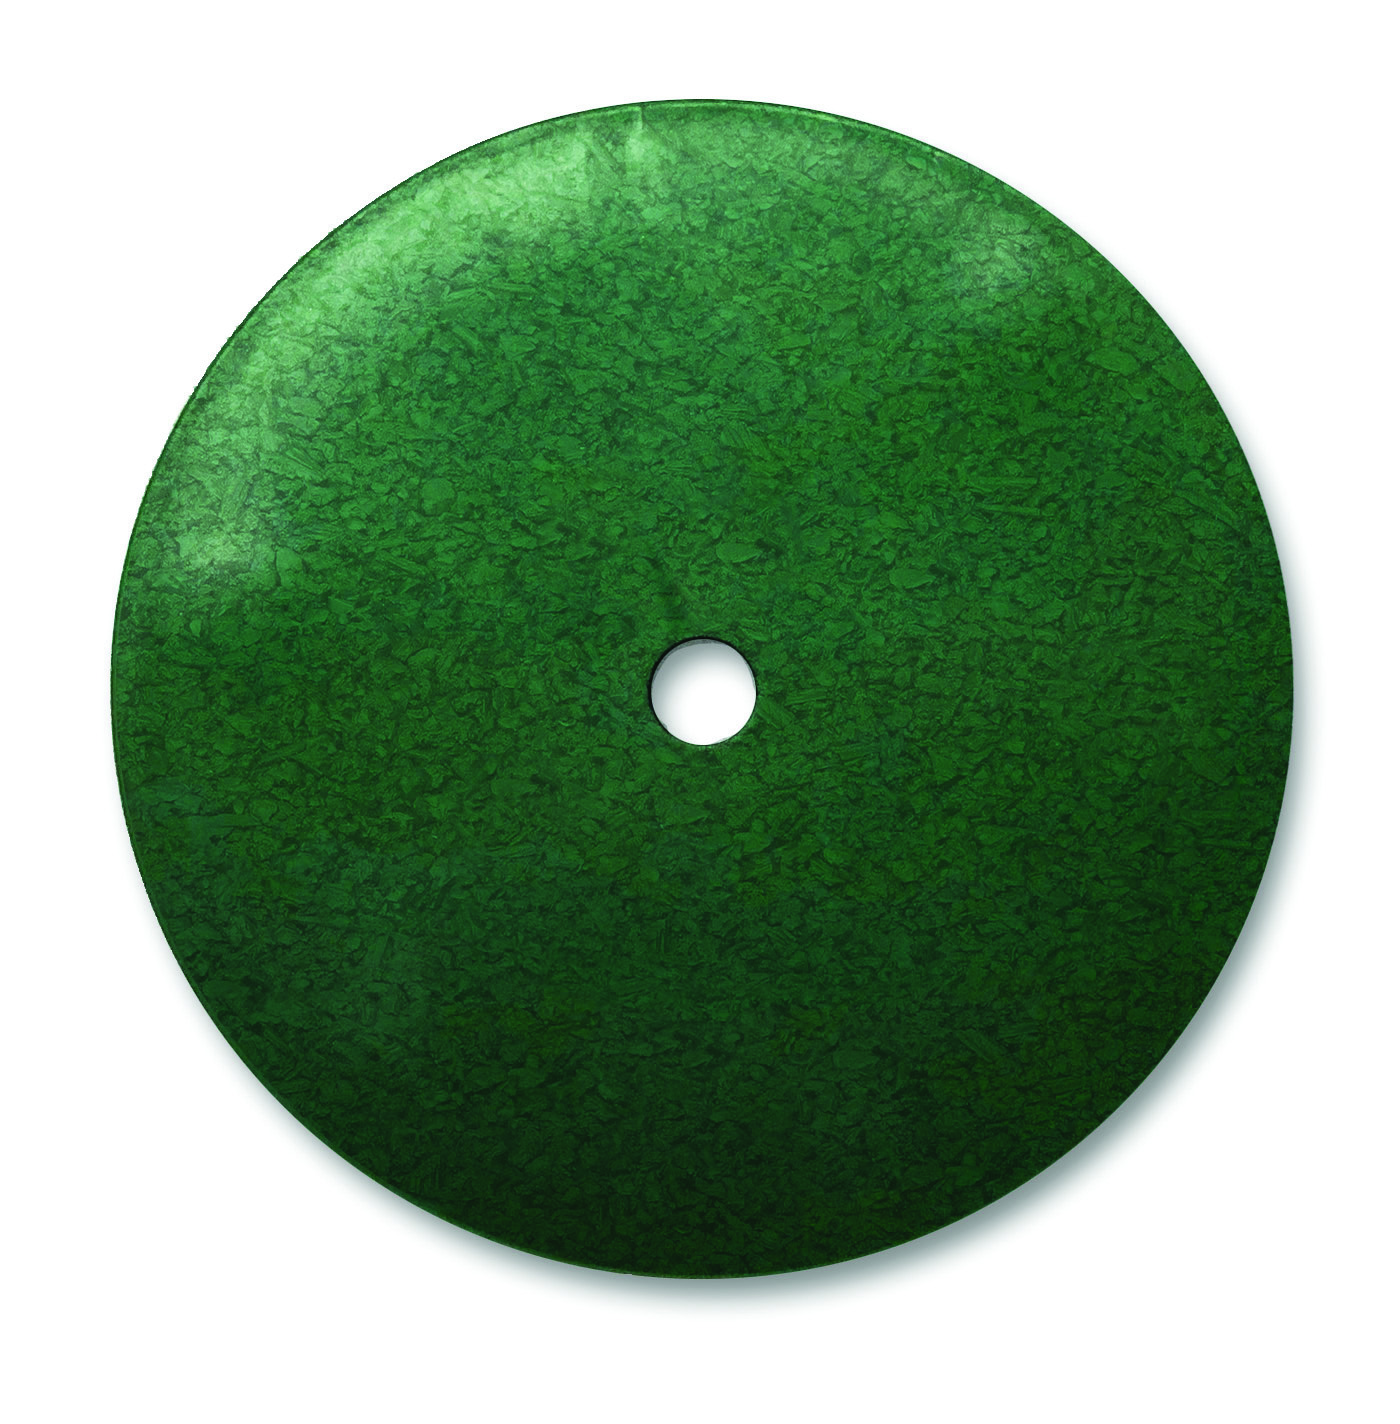 https://www.standardgolf.com/ecommerce/productimages/STANDARD_CUP_COVER_prdcode_3279_l_sg_hole_cover.jpg